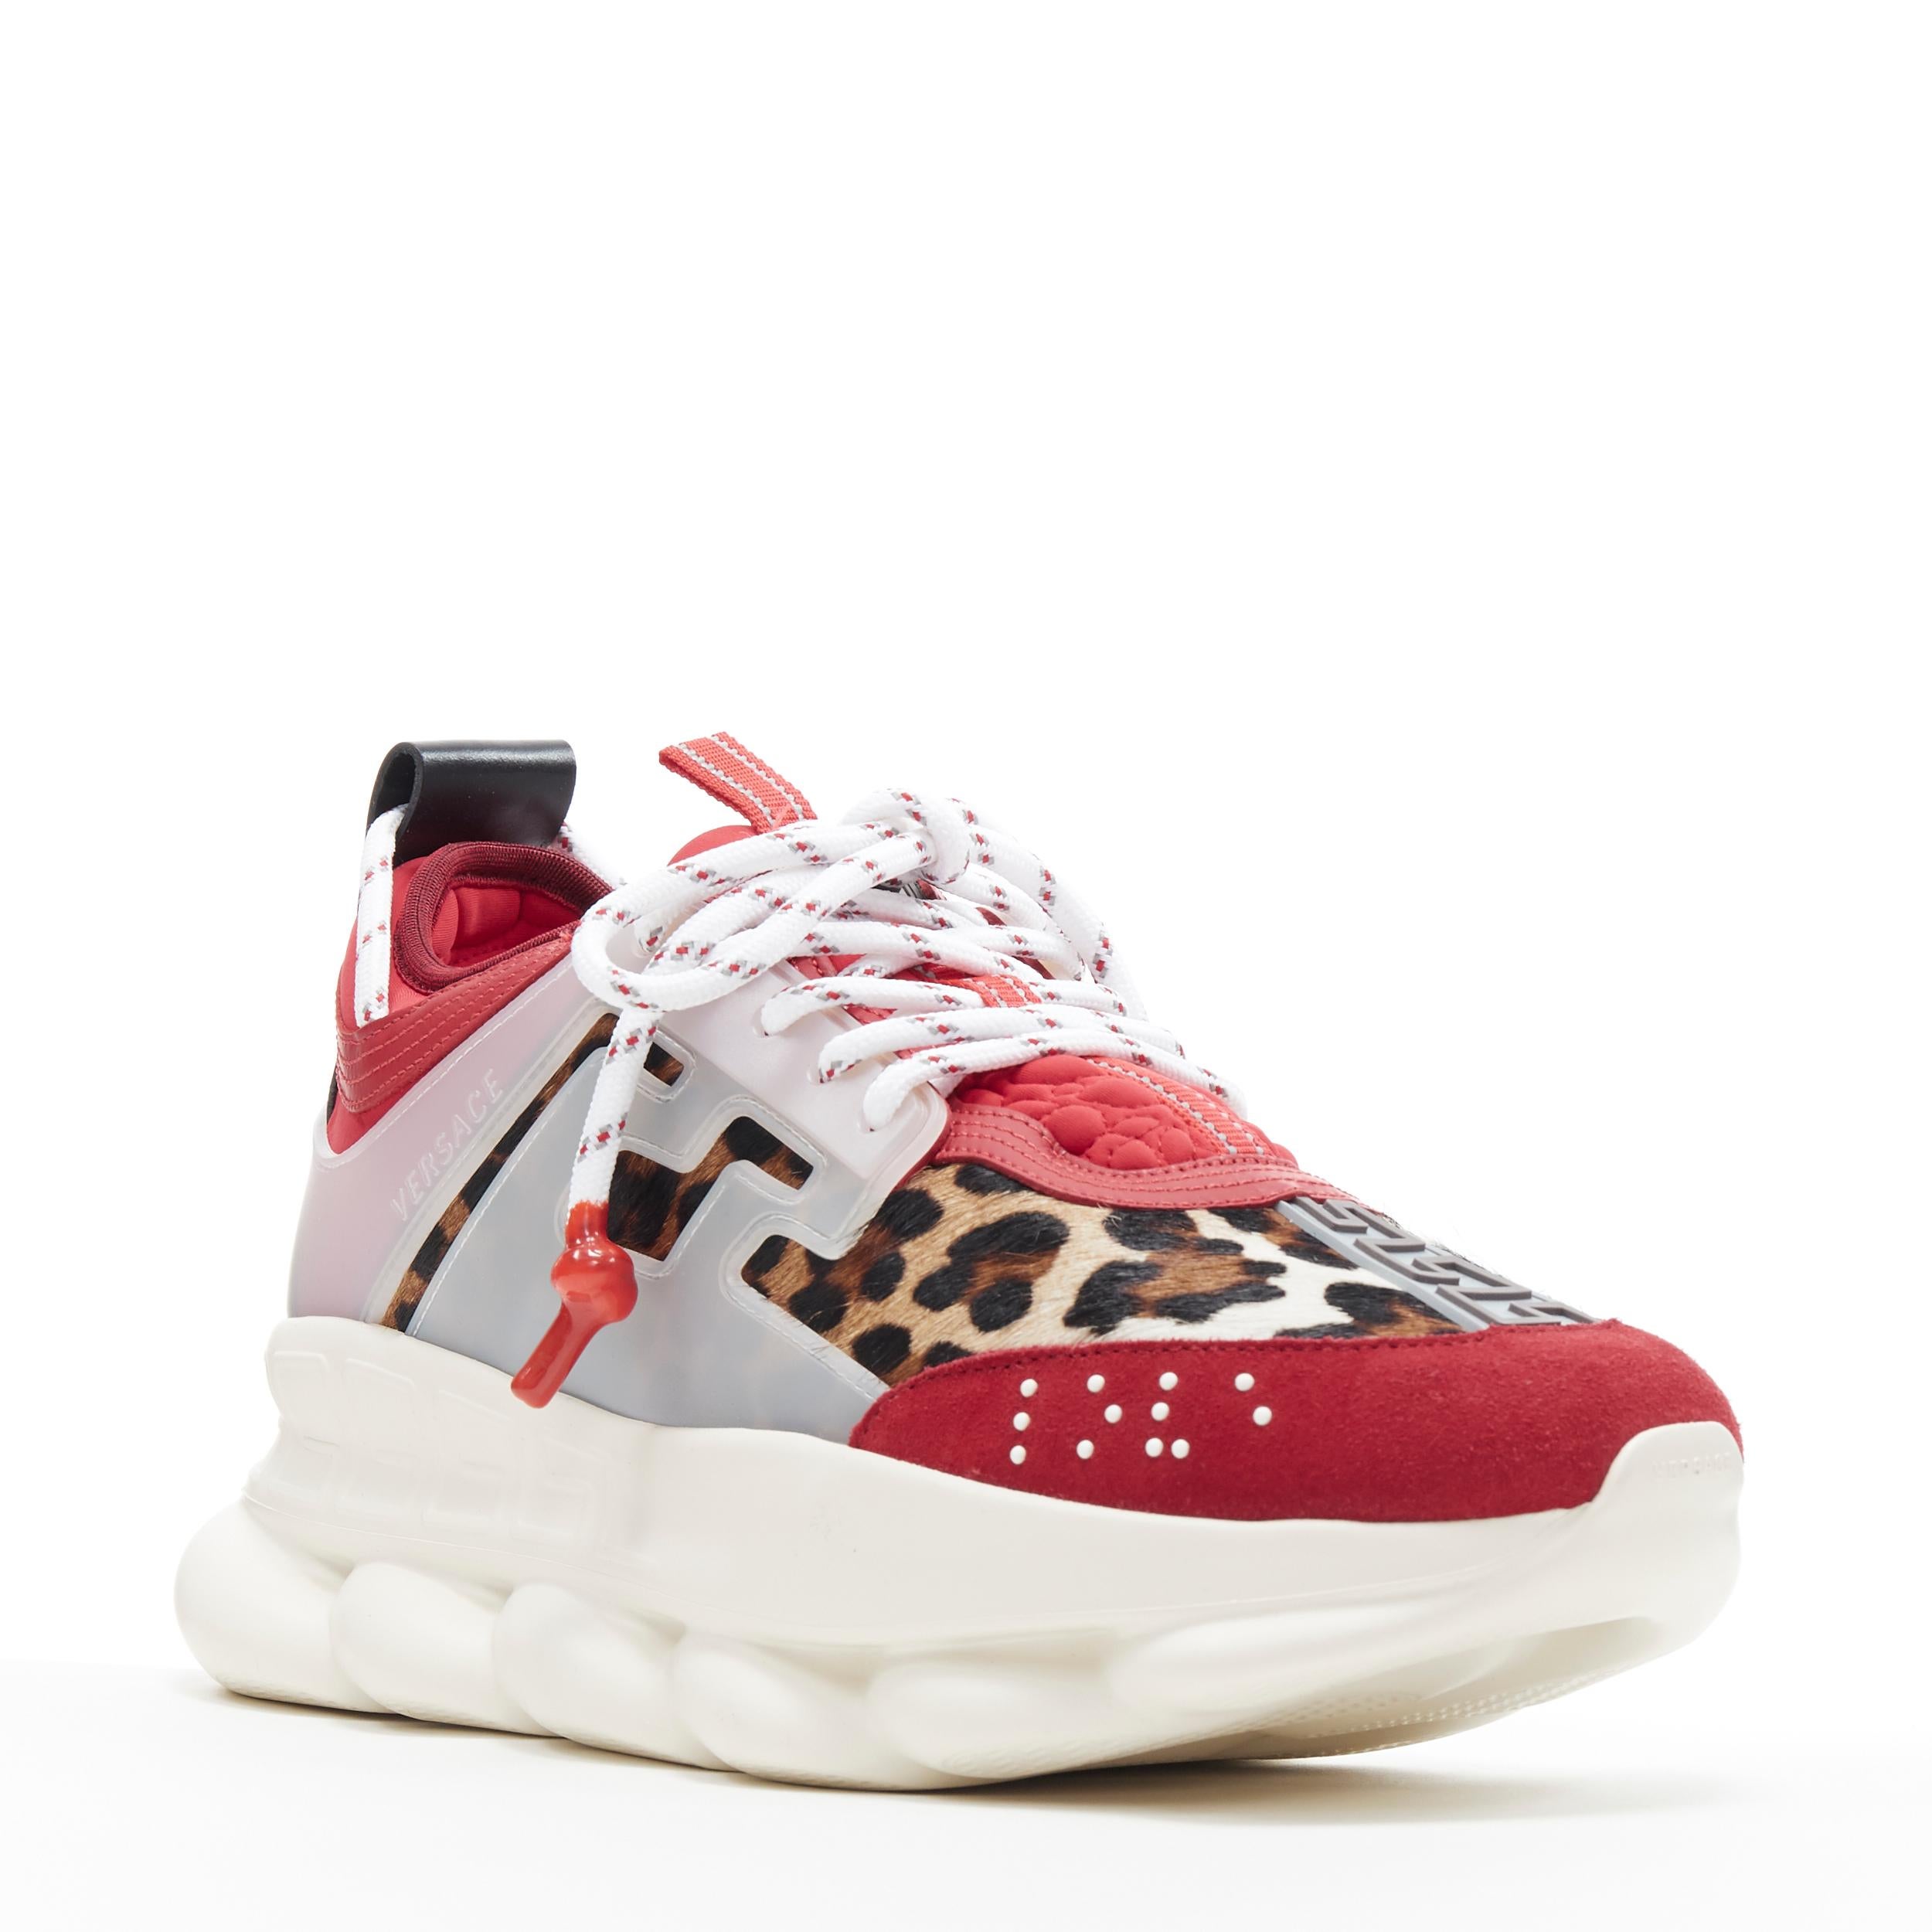 new VERSACE Chain Reaction Red Wild Leopard low chunky sneaker EU38.5 US5.5 
Reference: TGAS/B00287 
Brand: Versace 
Designer: Salehe Bembury 
Model: Chain Reaction Red Leopard 
Material: Leather 
Color: Red 
Pattern: Leopard 
Closure: Lace up